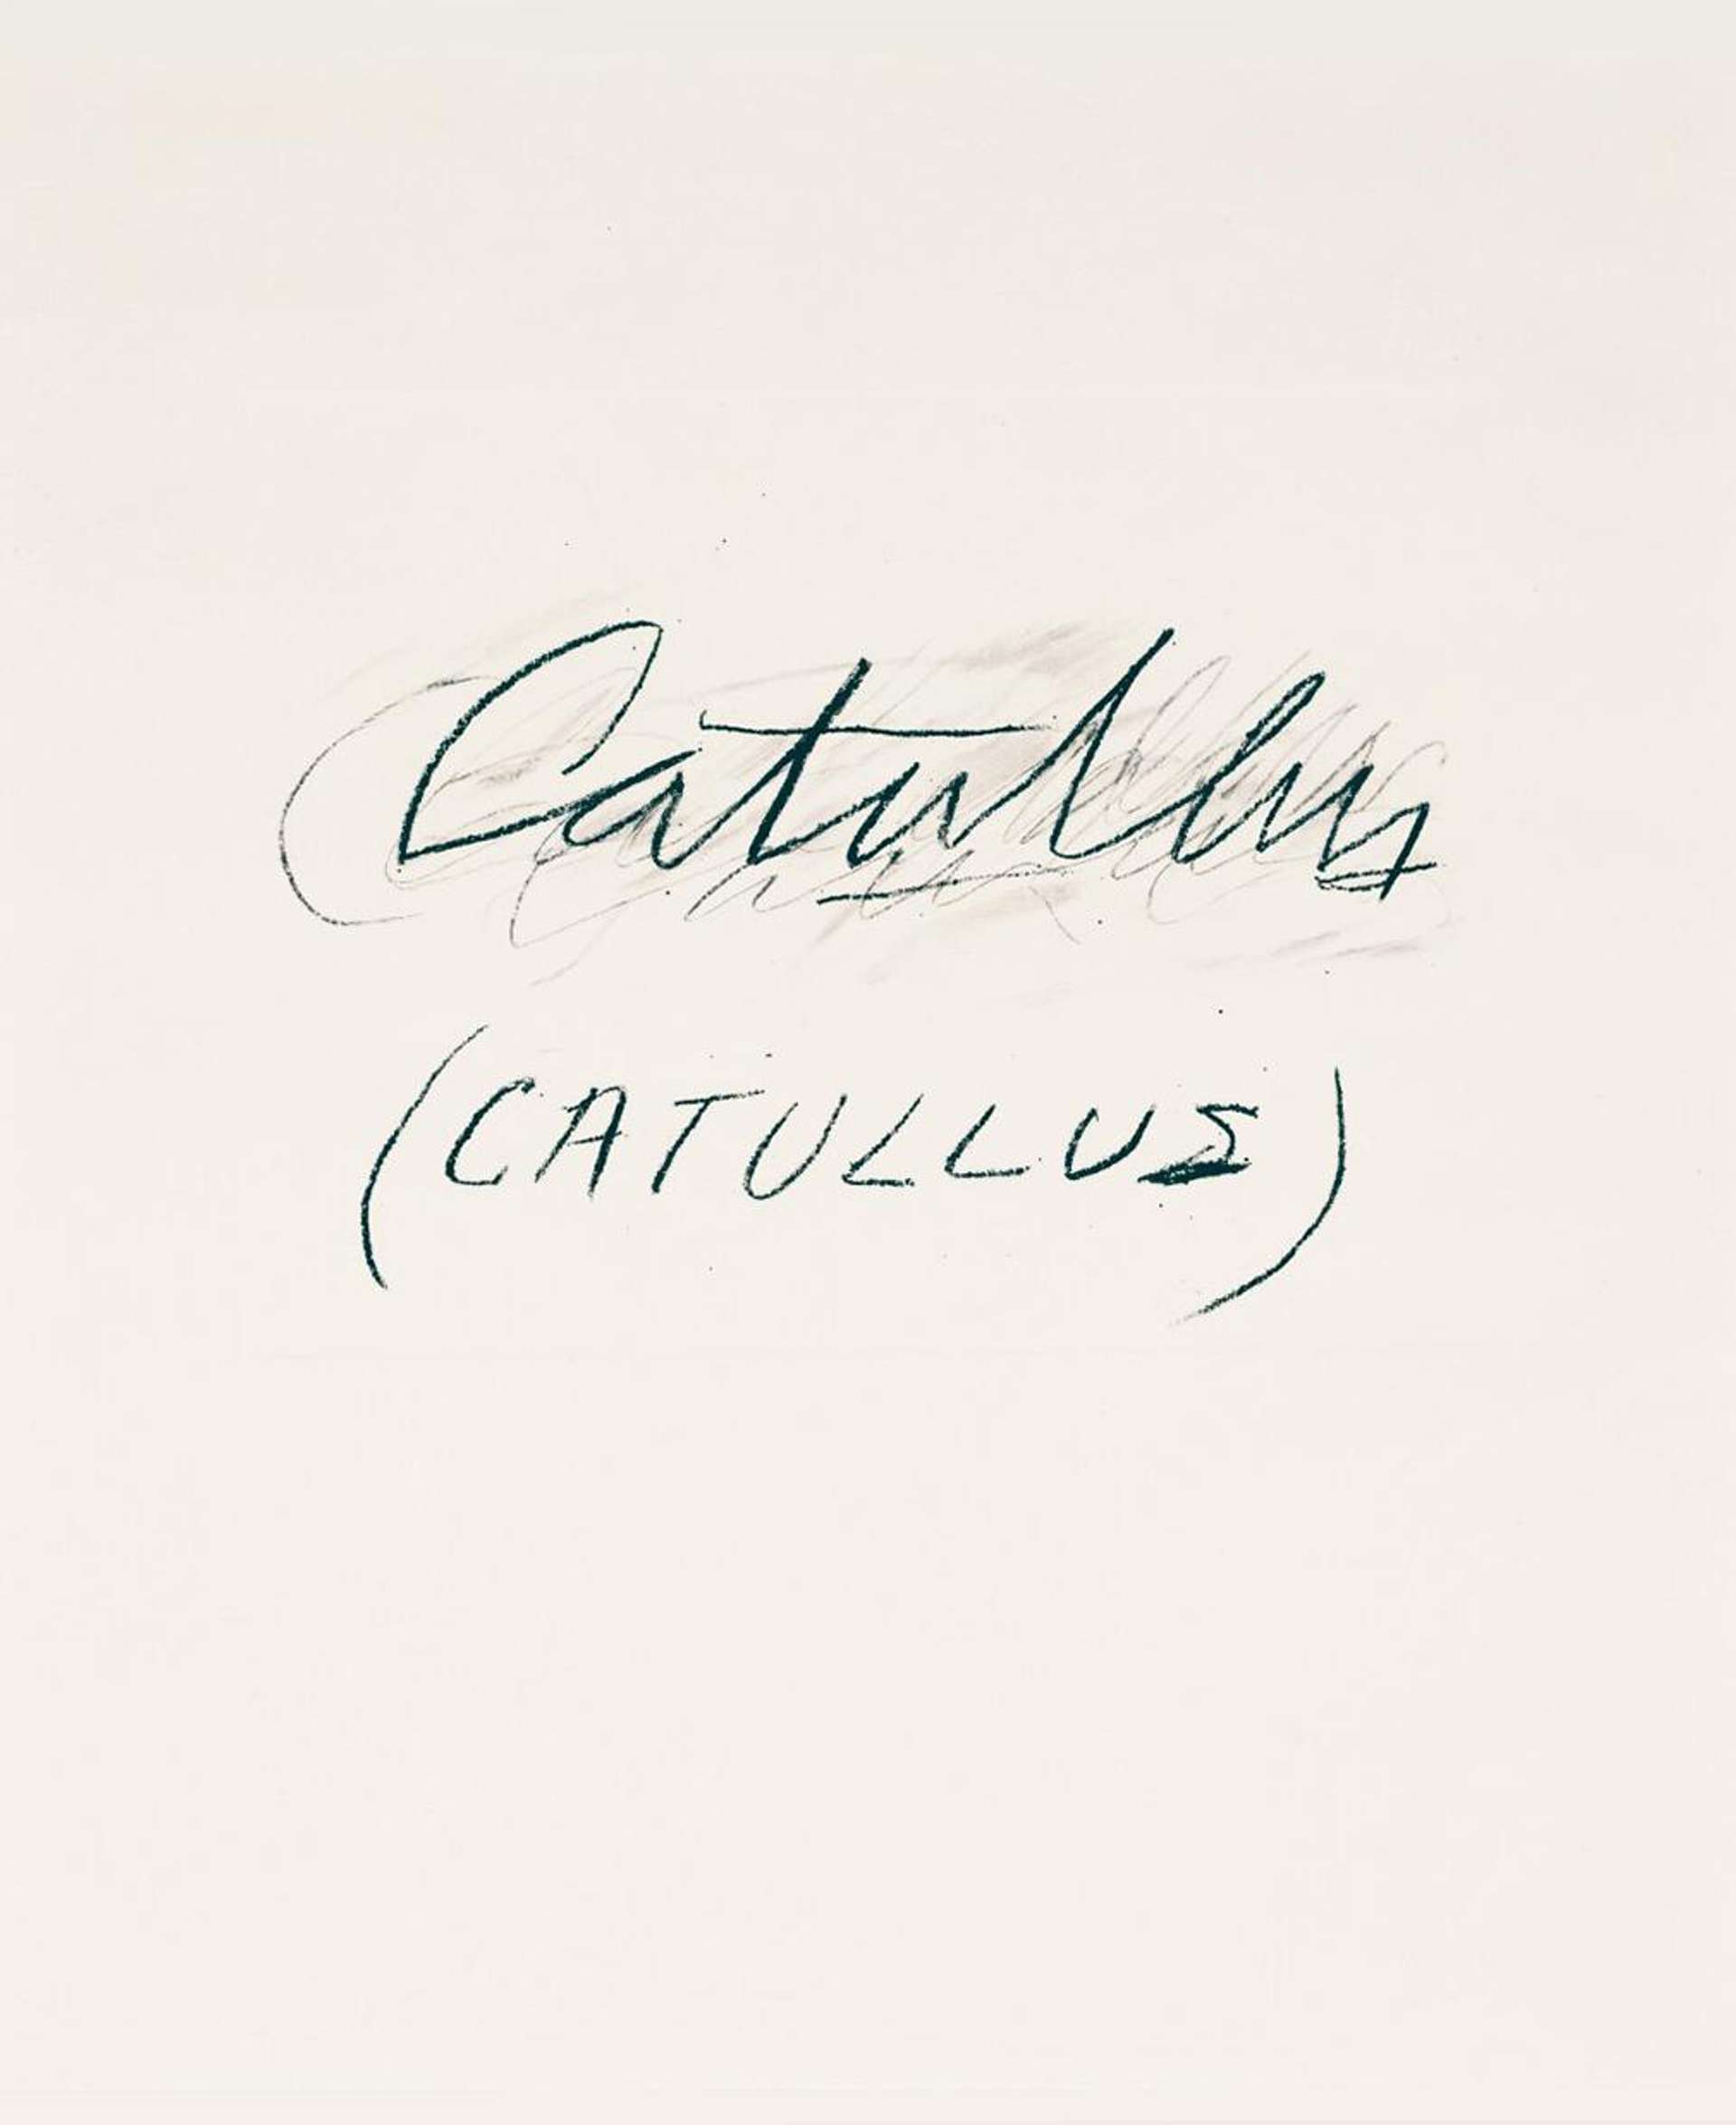 Catullus - Signed Print by Cy Twombly 1975 - MyArtBroker